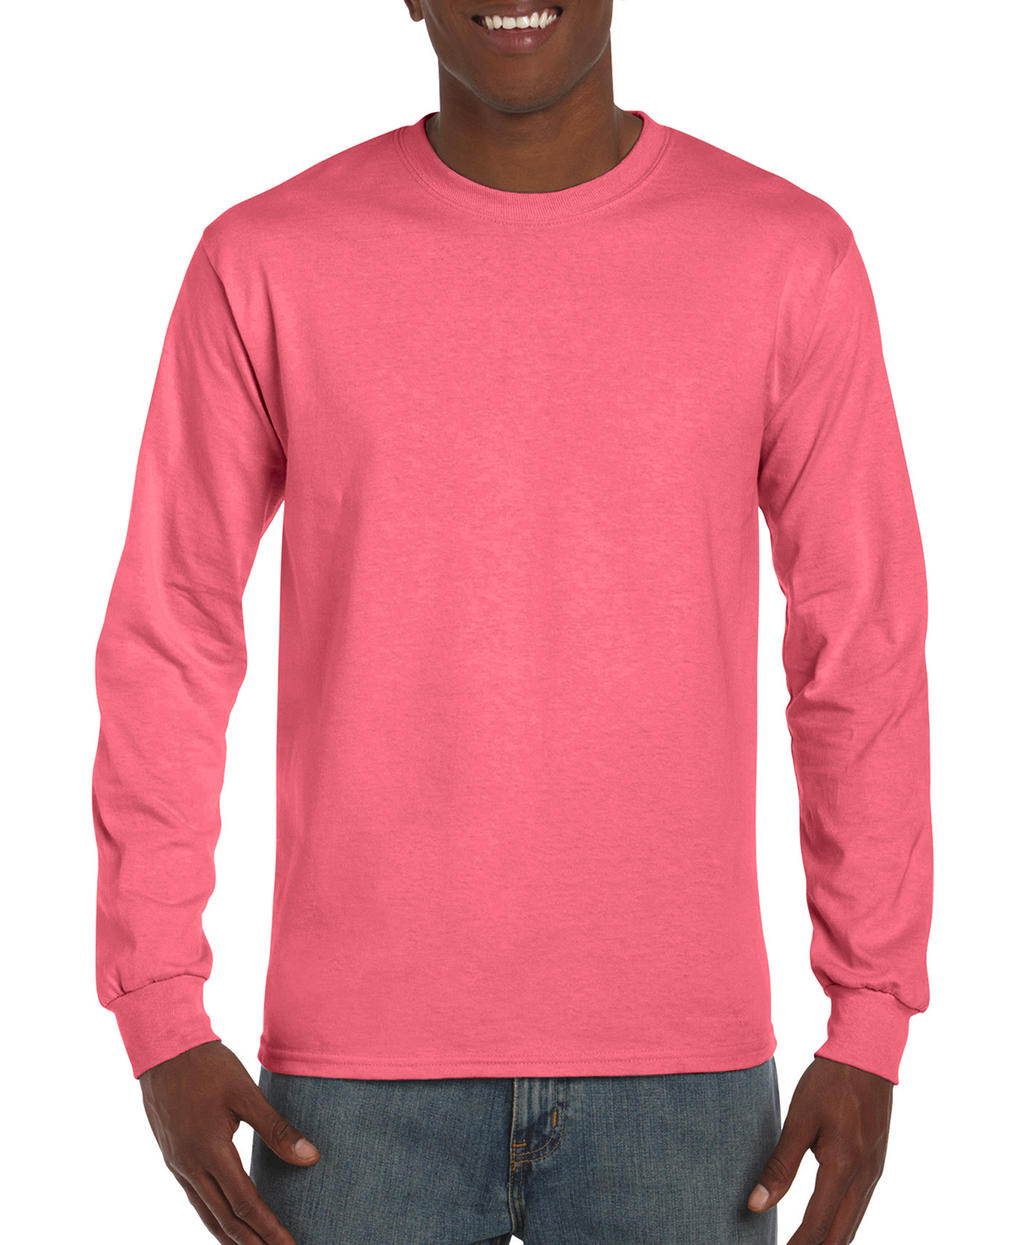  Hammer? Adult Long Sleeve T-Shirt in Farbe Coral Silk